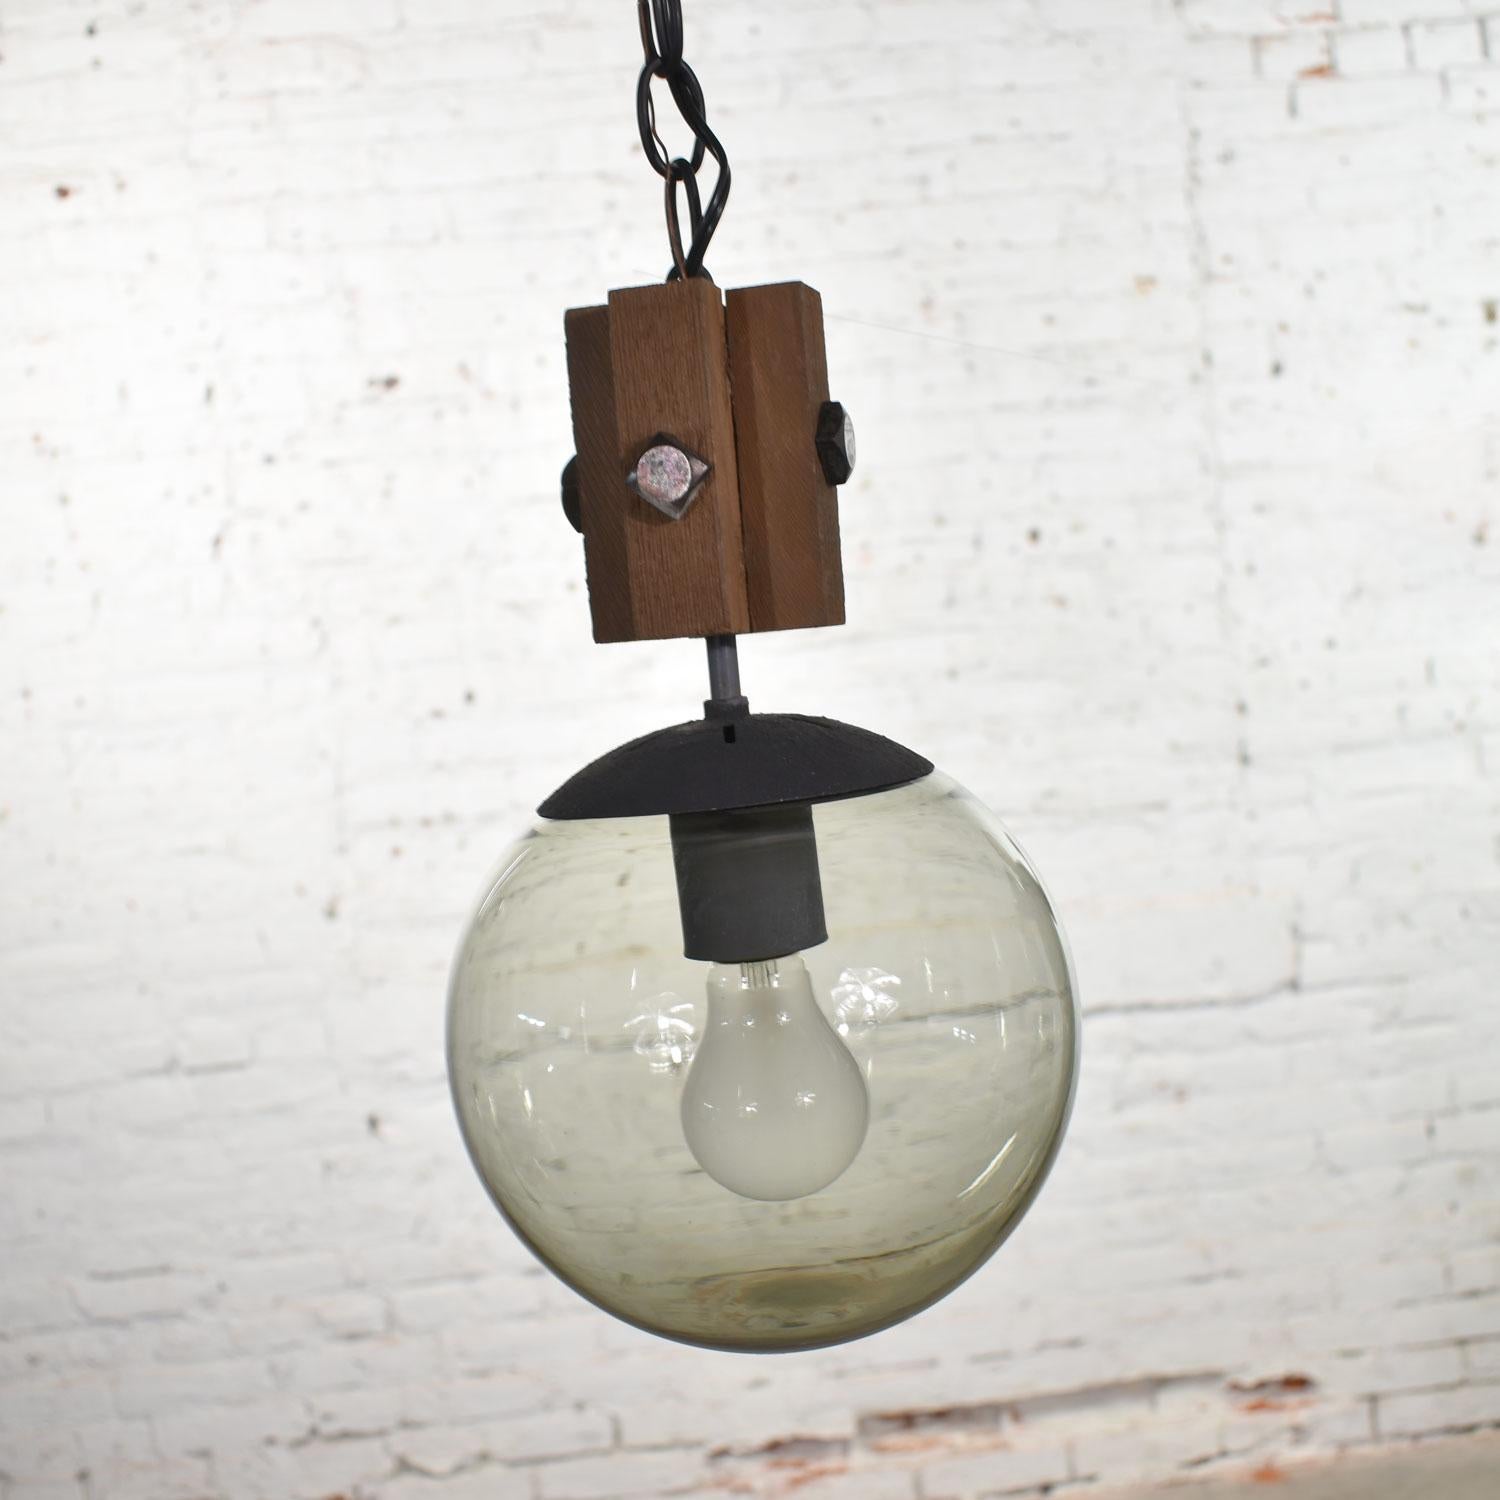 American Mid-Century Modern NOS Wood and Smoked Glass Globe Pendant Light Black Chain For Sale